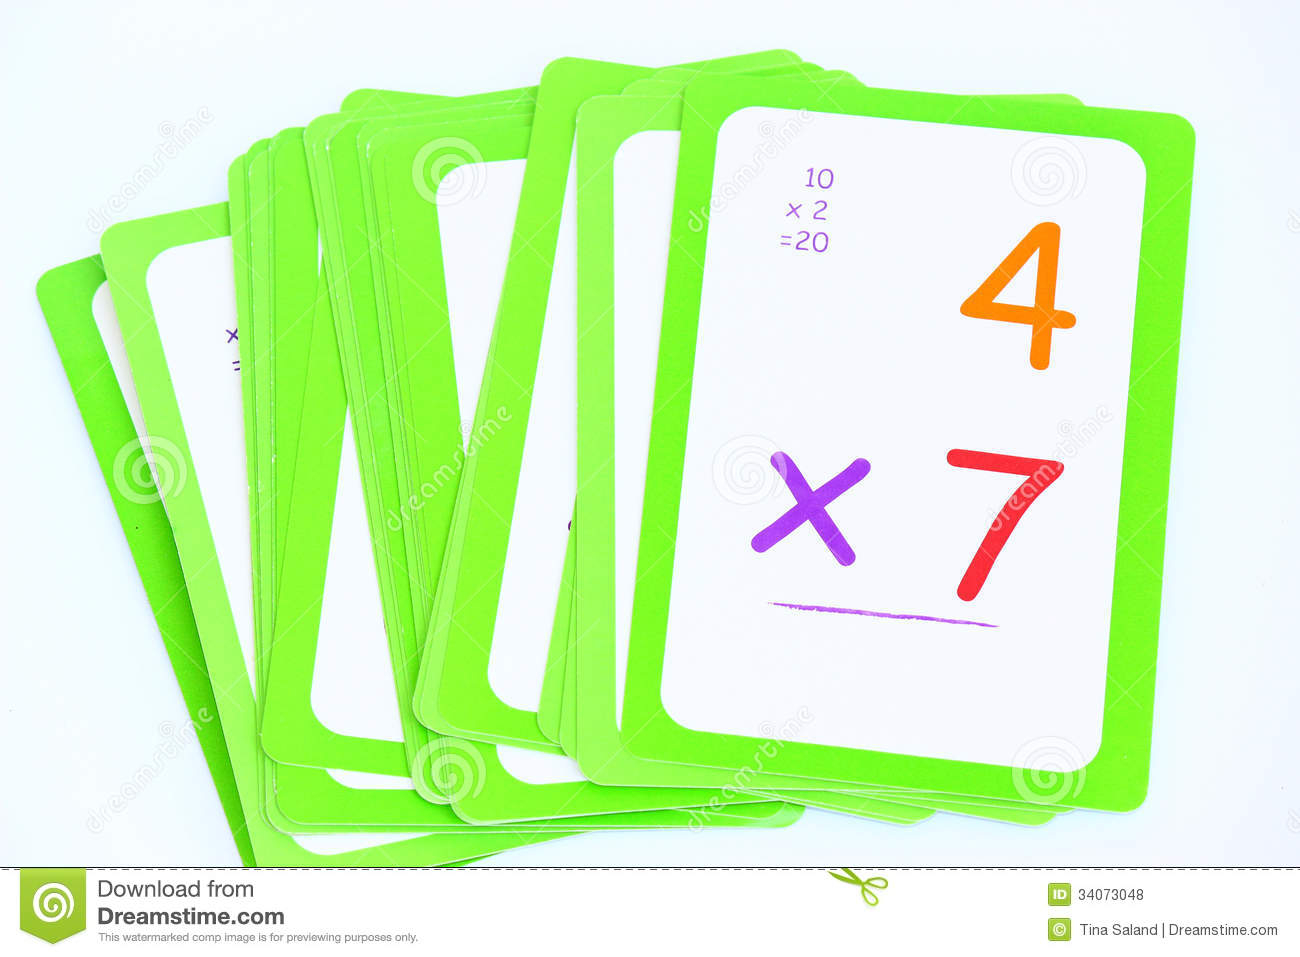 15 Multiplication Cards Photos - Free &amp;amp; Royalty-Free Stock